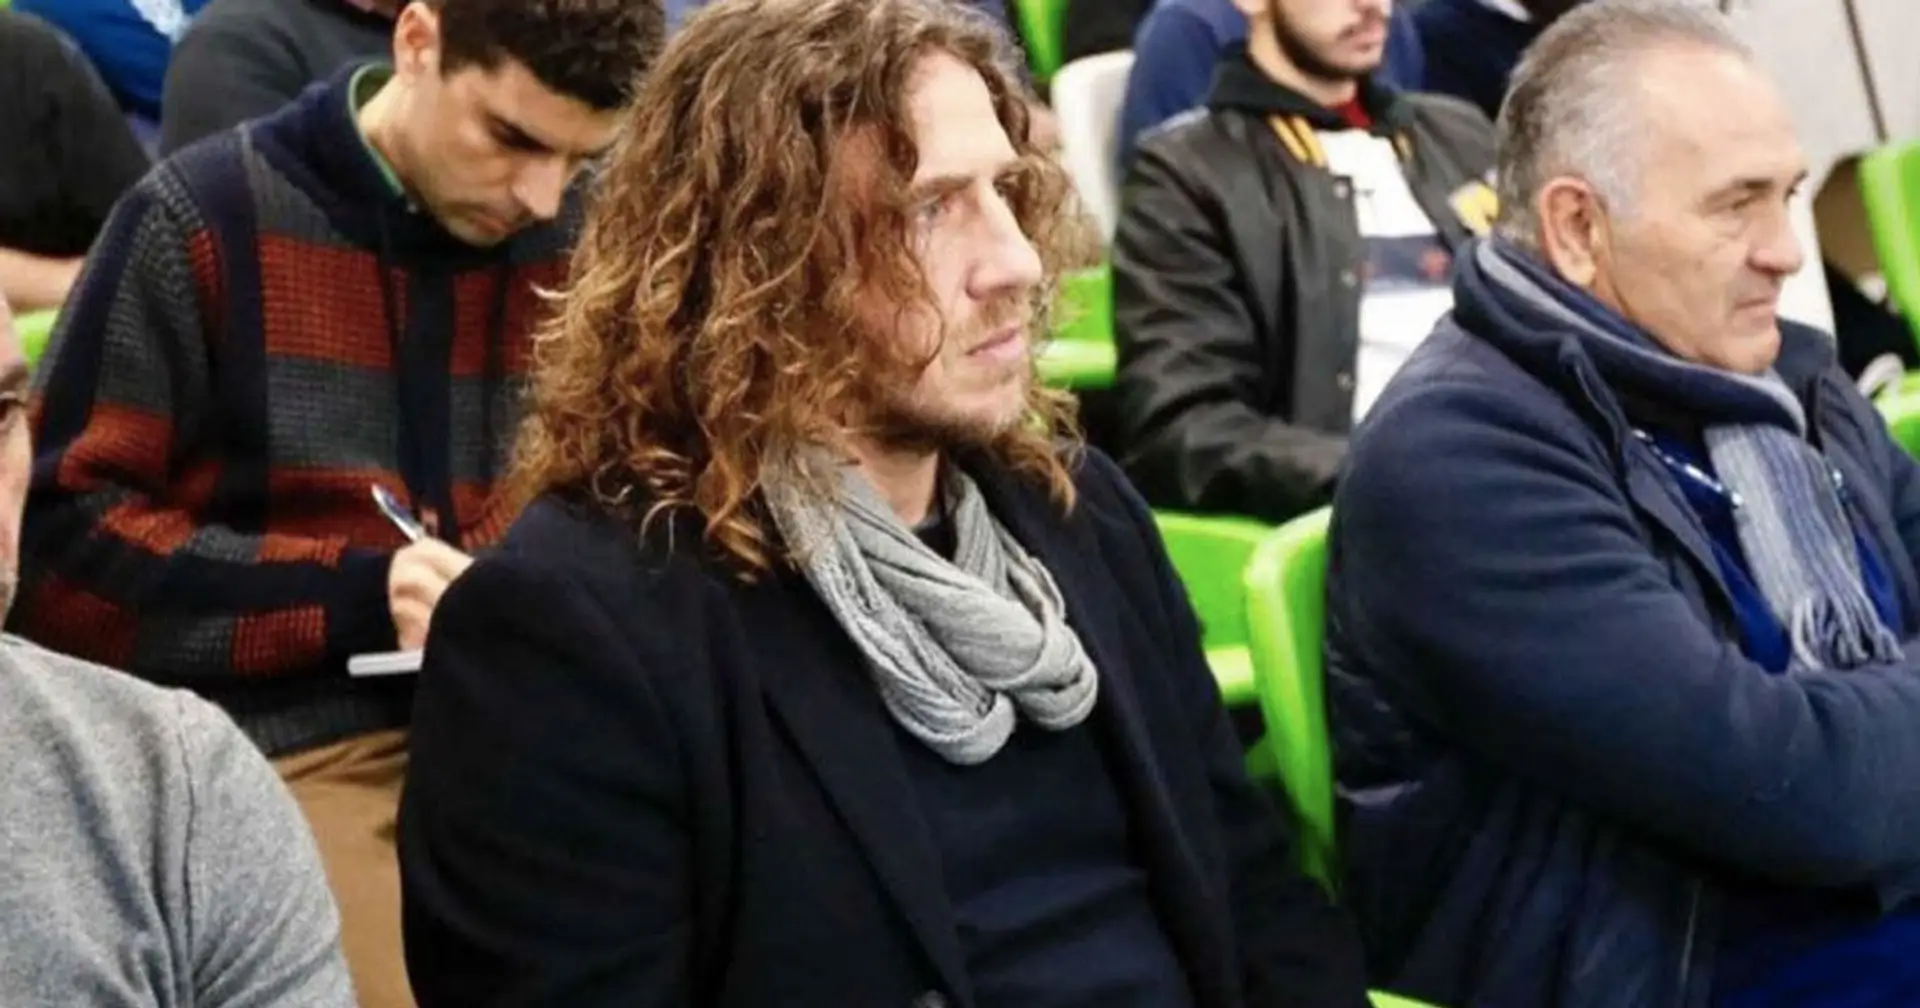 How many players of Carles Puyol's agency play for Barcelona?